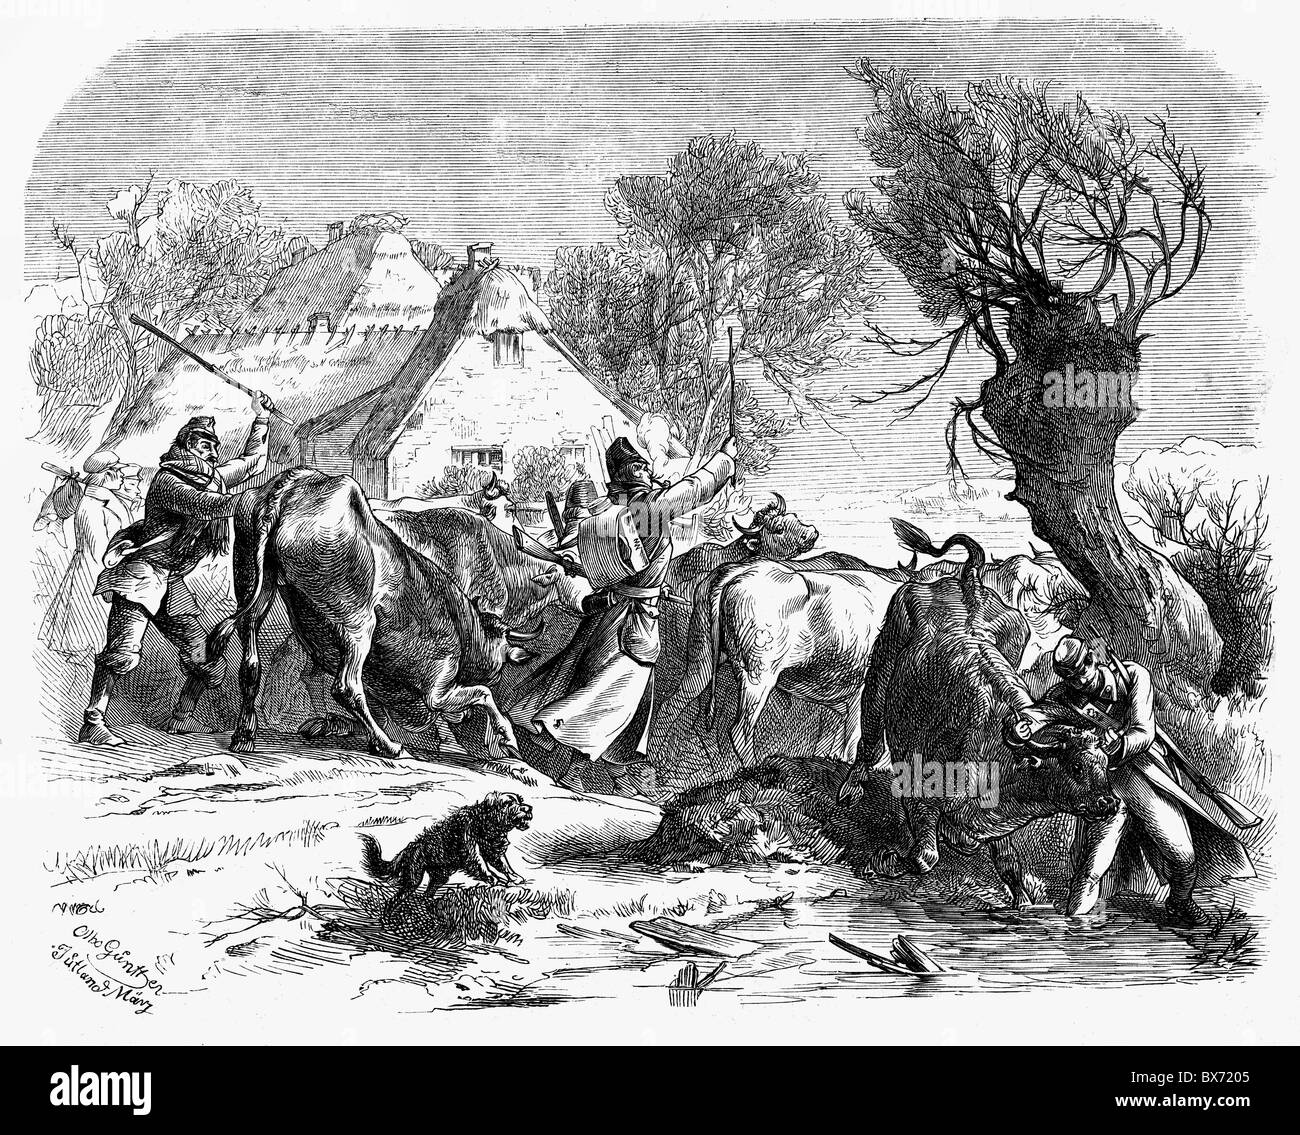 events, Second Schleswig War 1864, Austrian soldiers rounding up cattle for food, Jutland, March 1864, wood engraving after drawing by Otto Guenther, 19th century, Denmark, Germany, Wars of German Unification, Austria, Austrians, historic, historical, requisition, Gunther, Günther, people, Additional-Rights-Clearences-Not Available Stock Photo